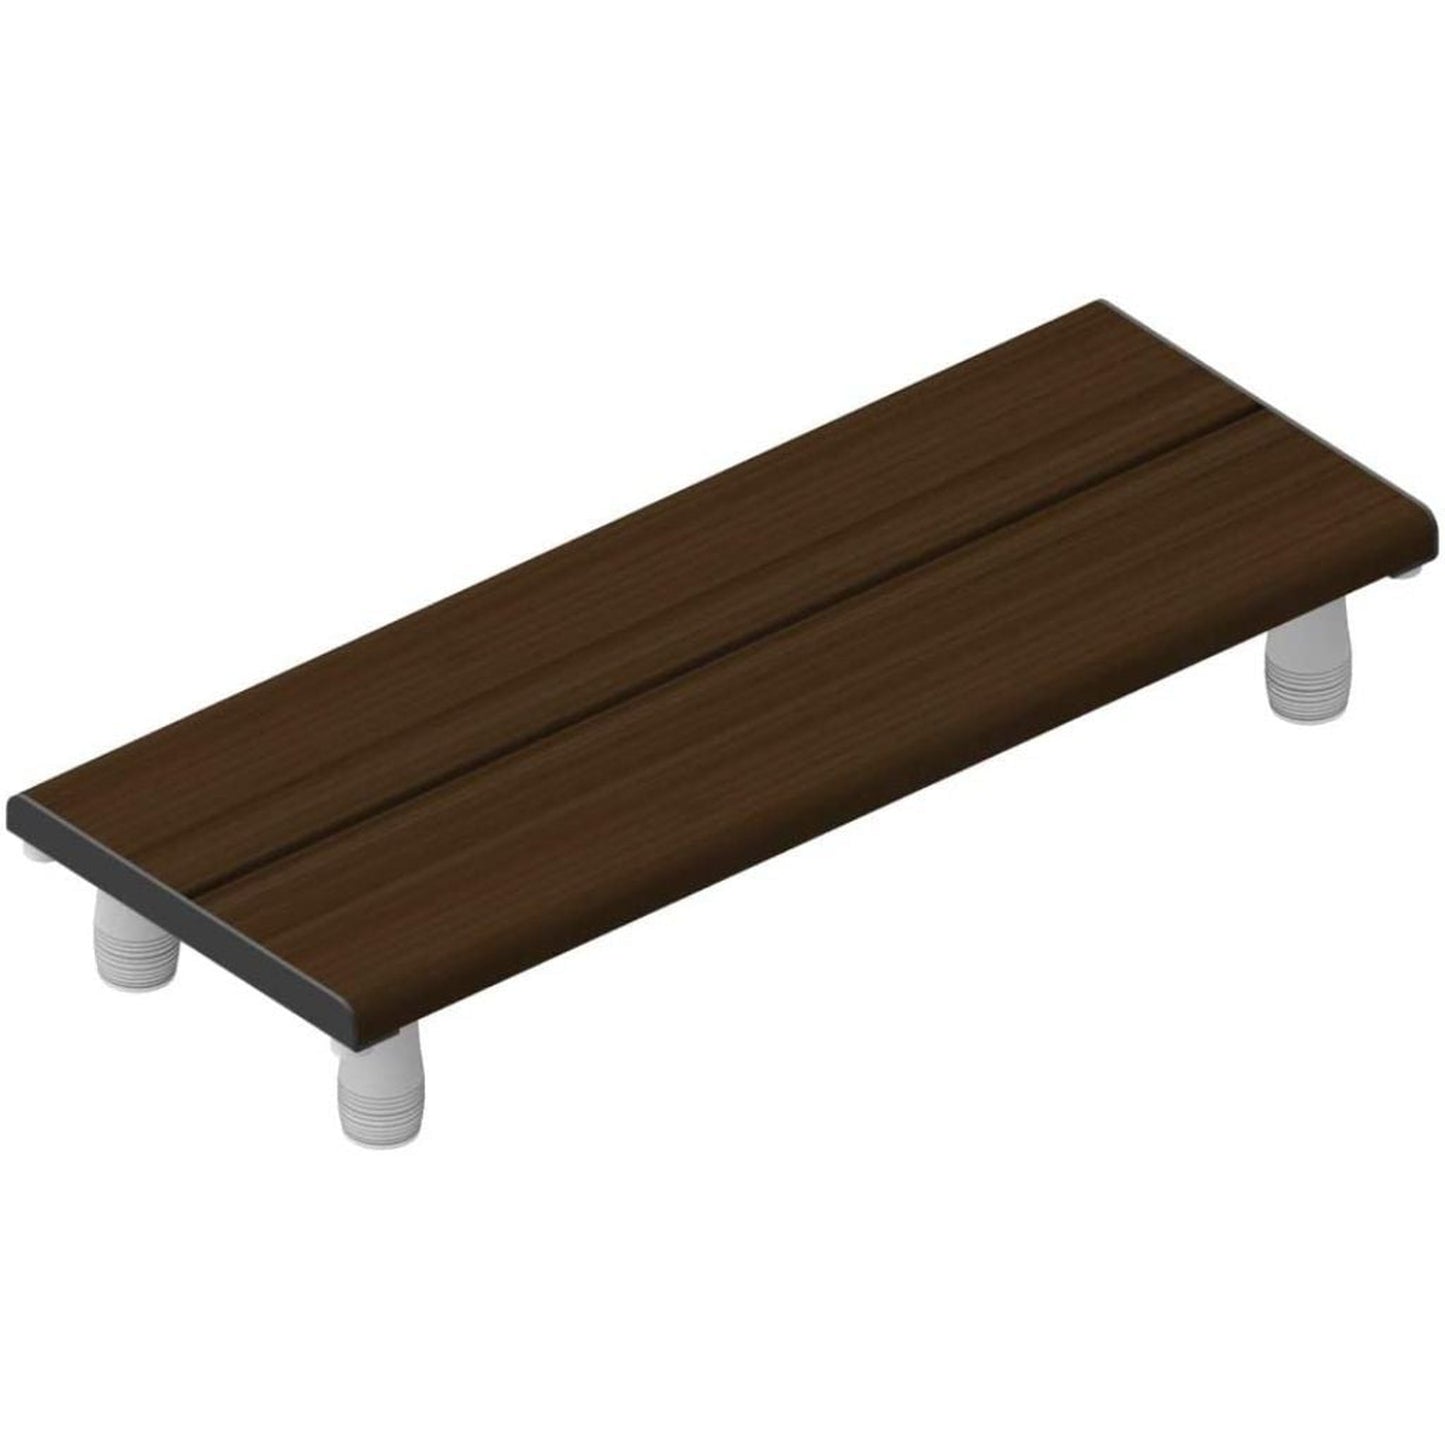 Invisia 35” Rectangle Walnut Stained Bamboo Bath Bench for Bathtub With Matte Black Frame